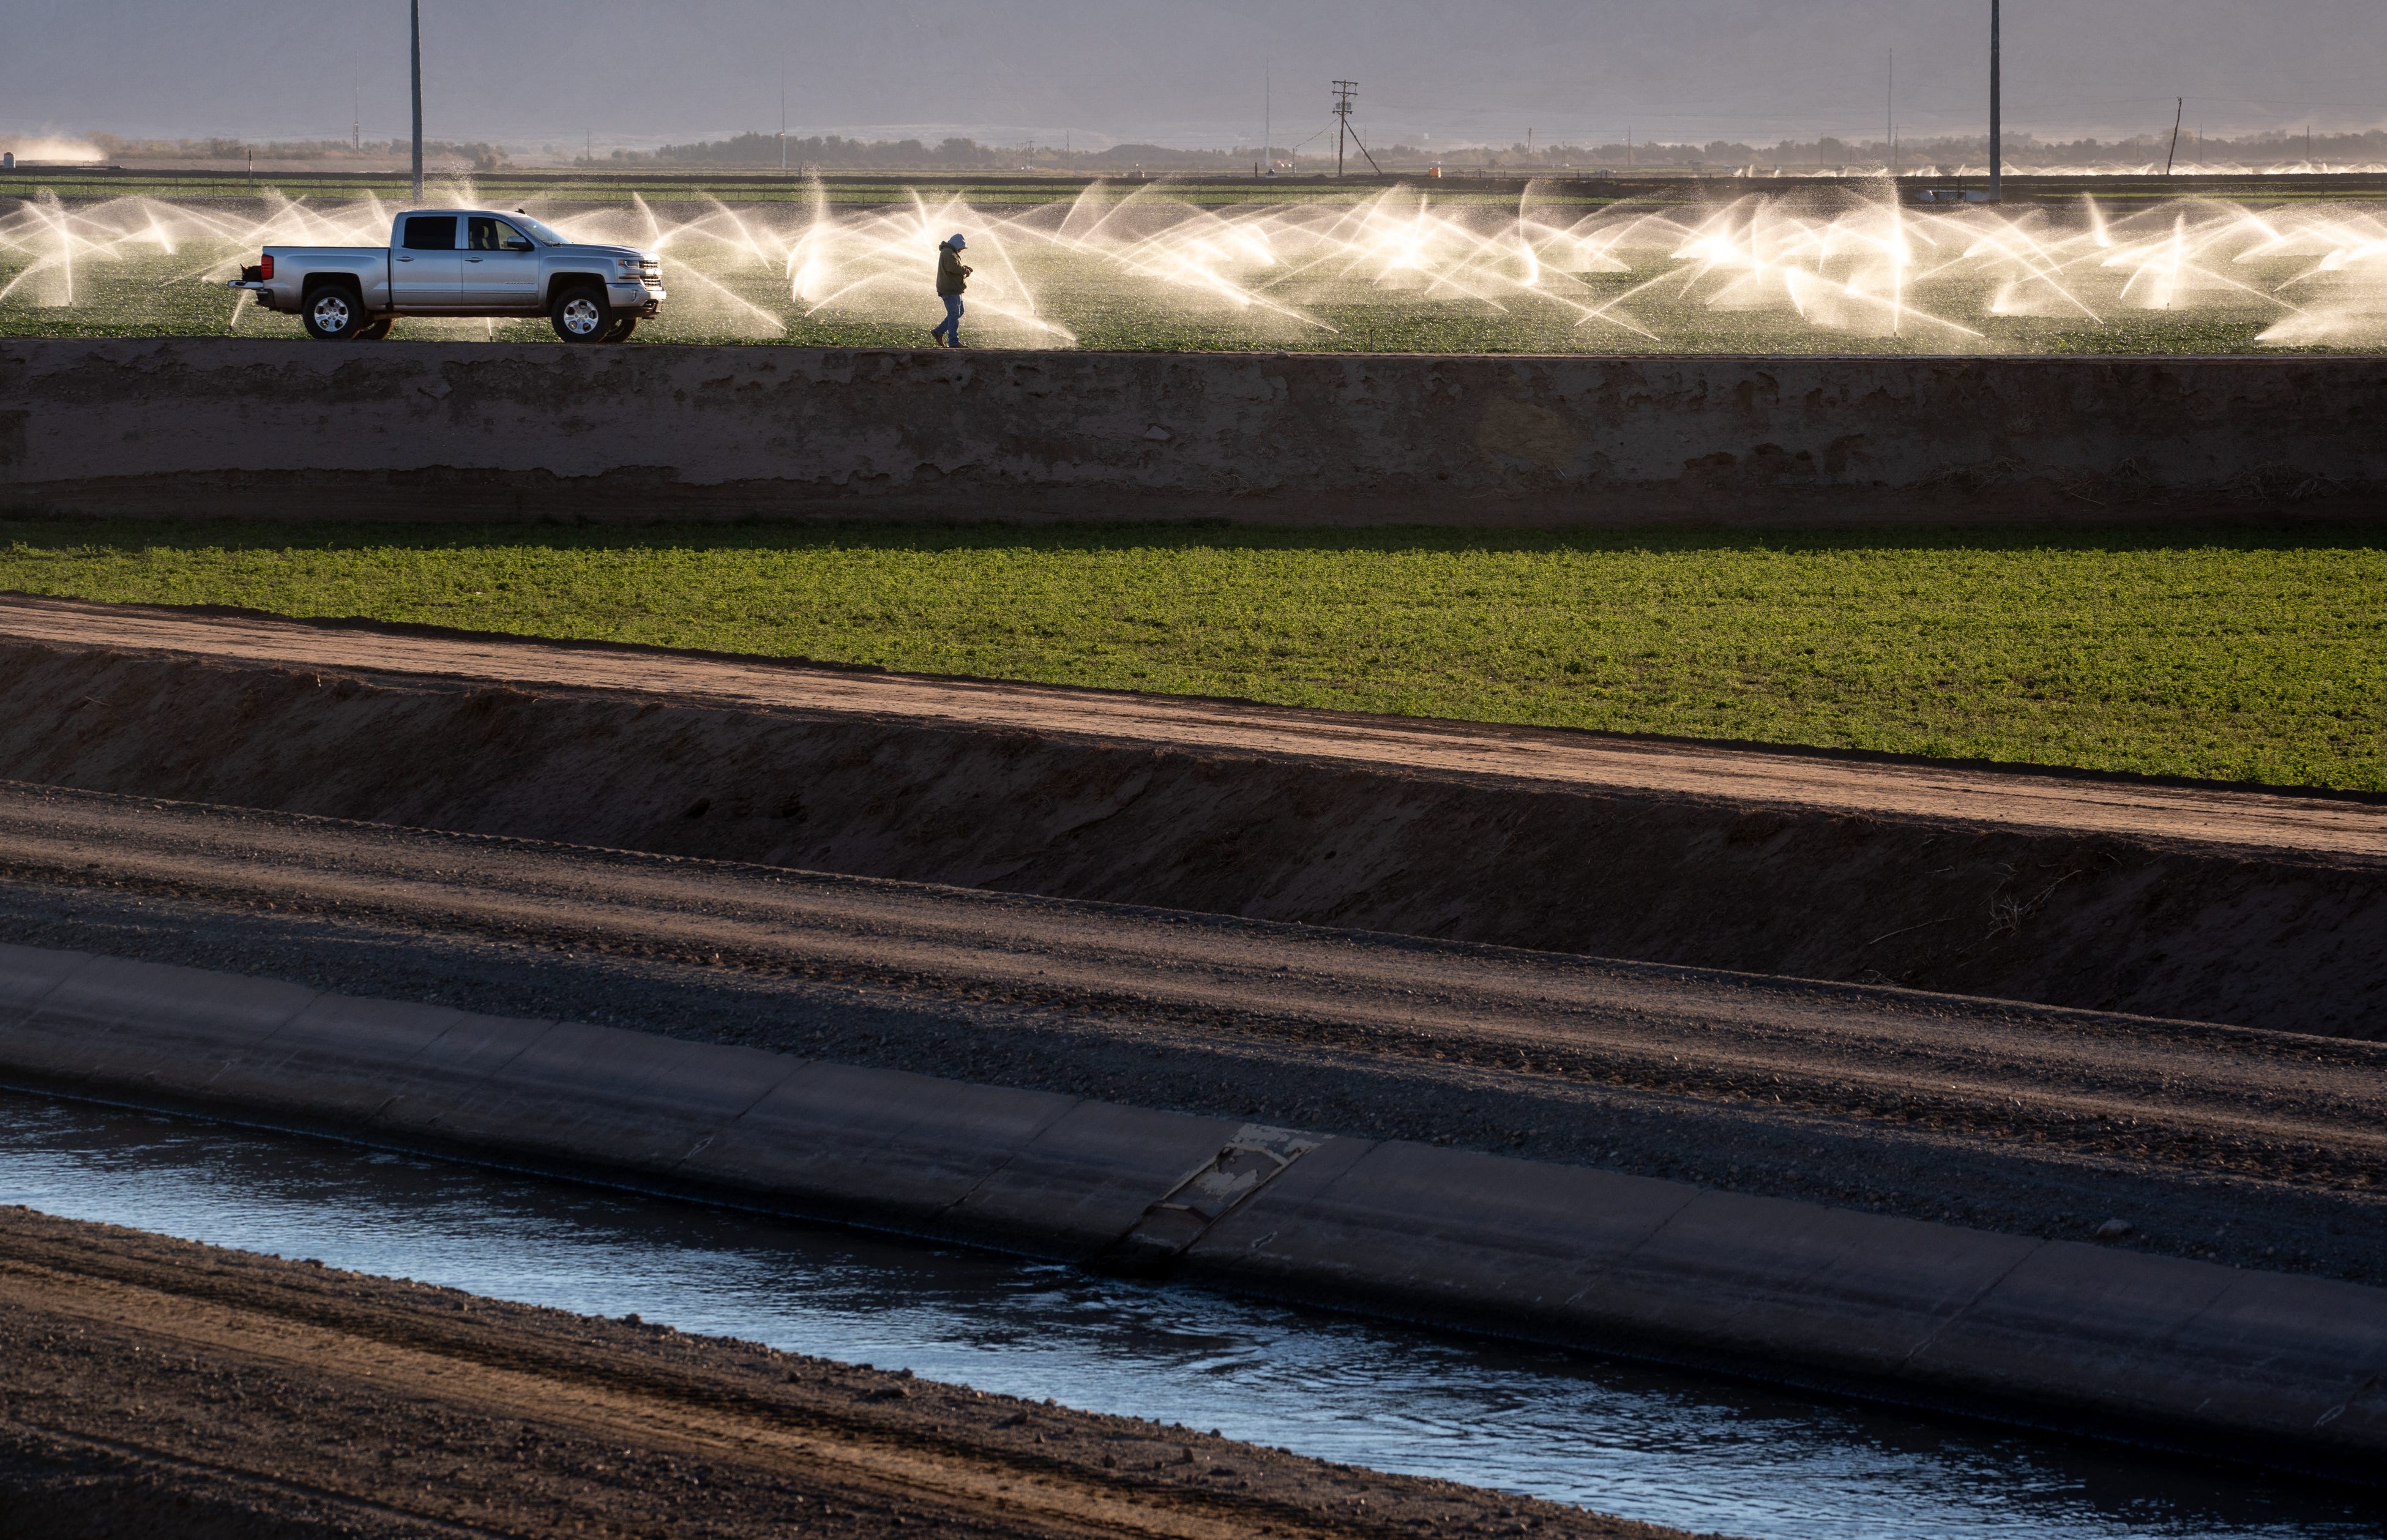 A farm worker irrigates a lettuce field east of Yuma on Jan. 28, 2022. Arizona farmers who take water directly from the Lower Colorado River have among the most secure rights to its water, but now risk losing the river’s flow if Lake Mead continues its decline.